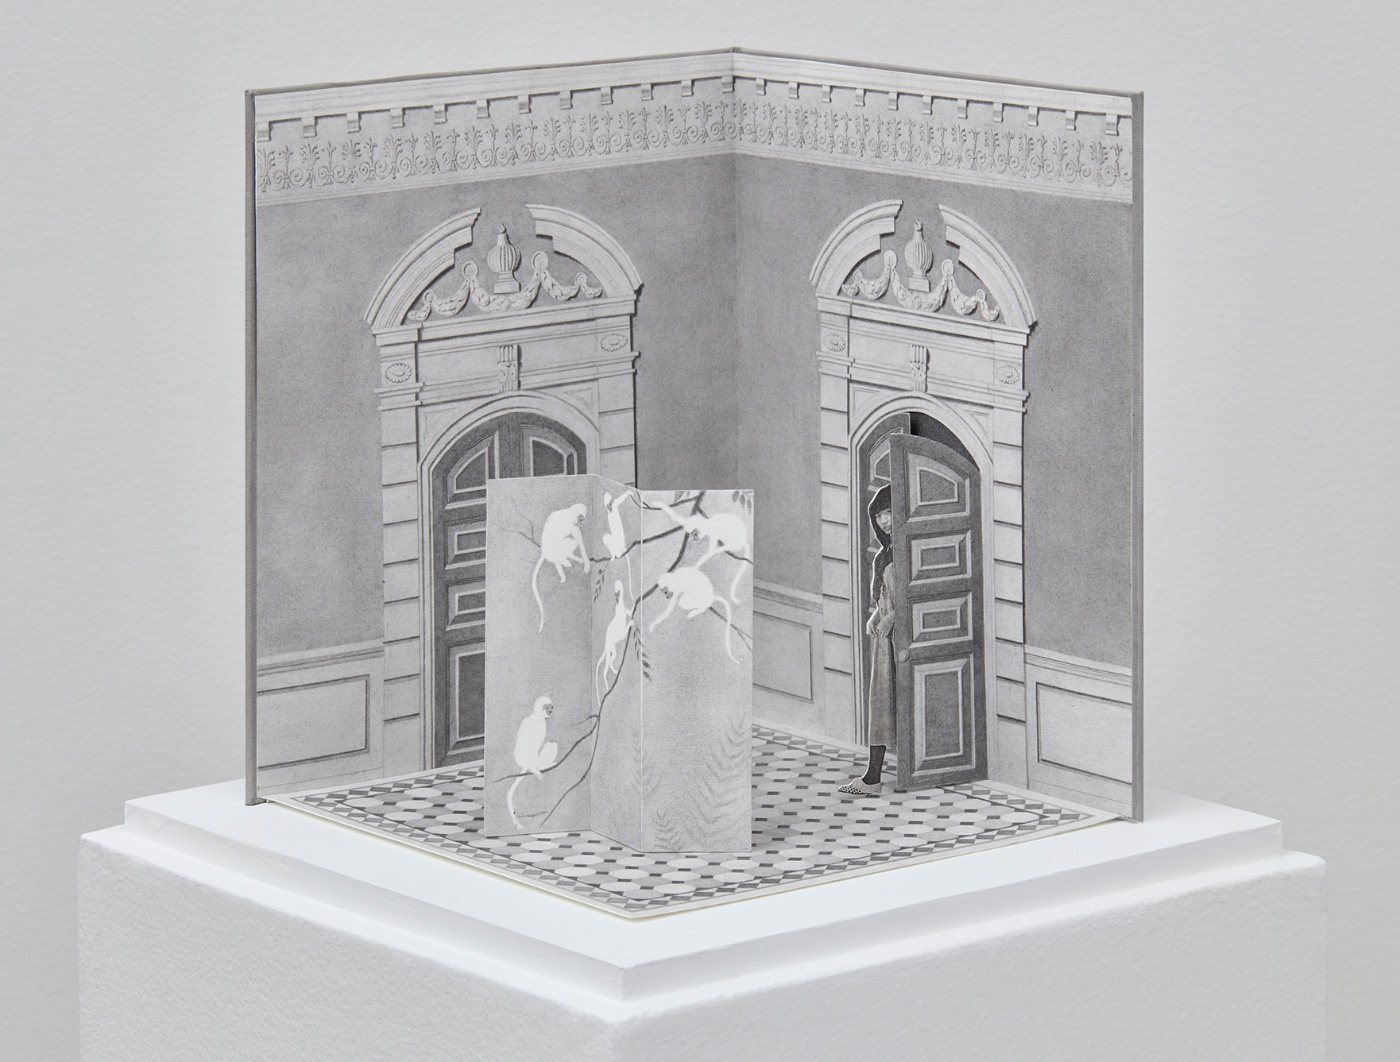 Greyscale drawing of a museum gallery with a woman loitering